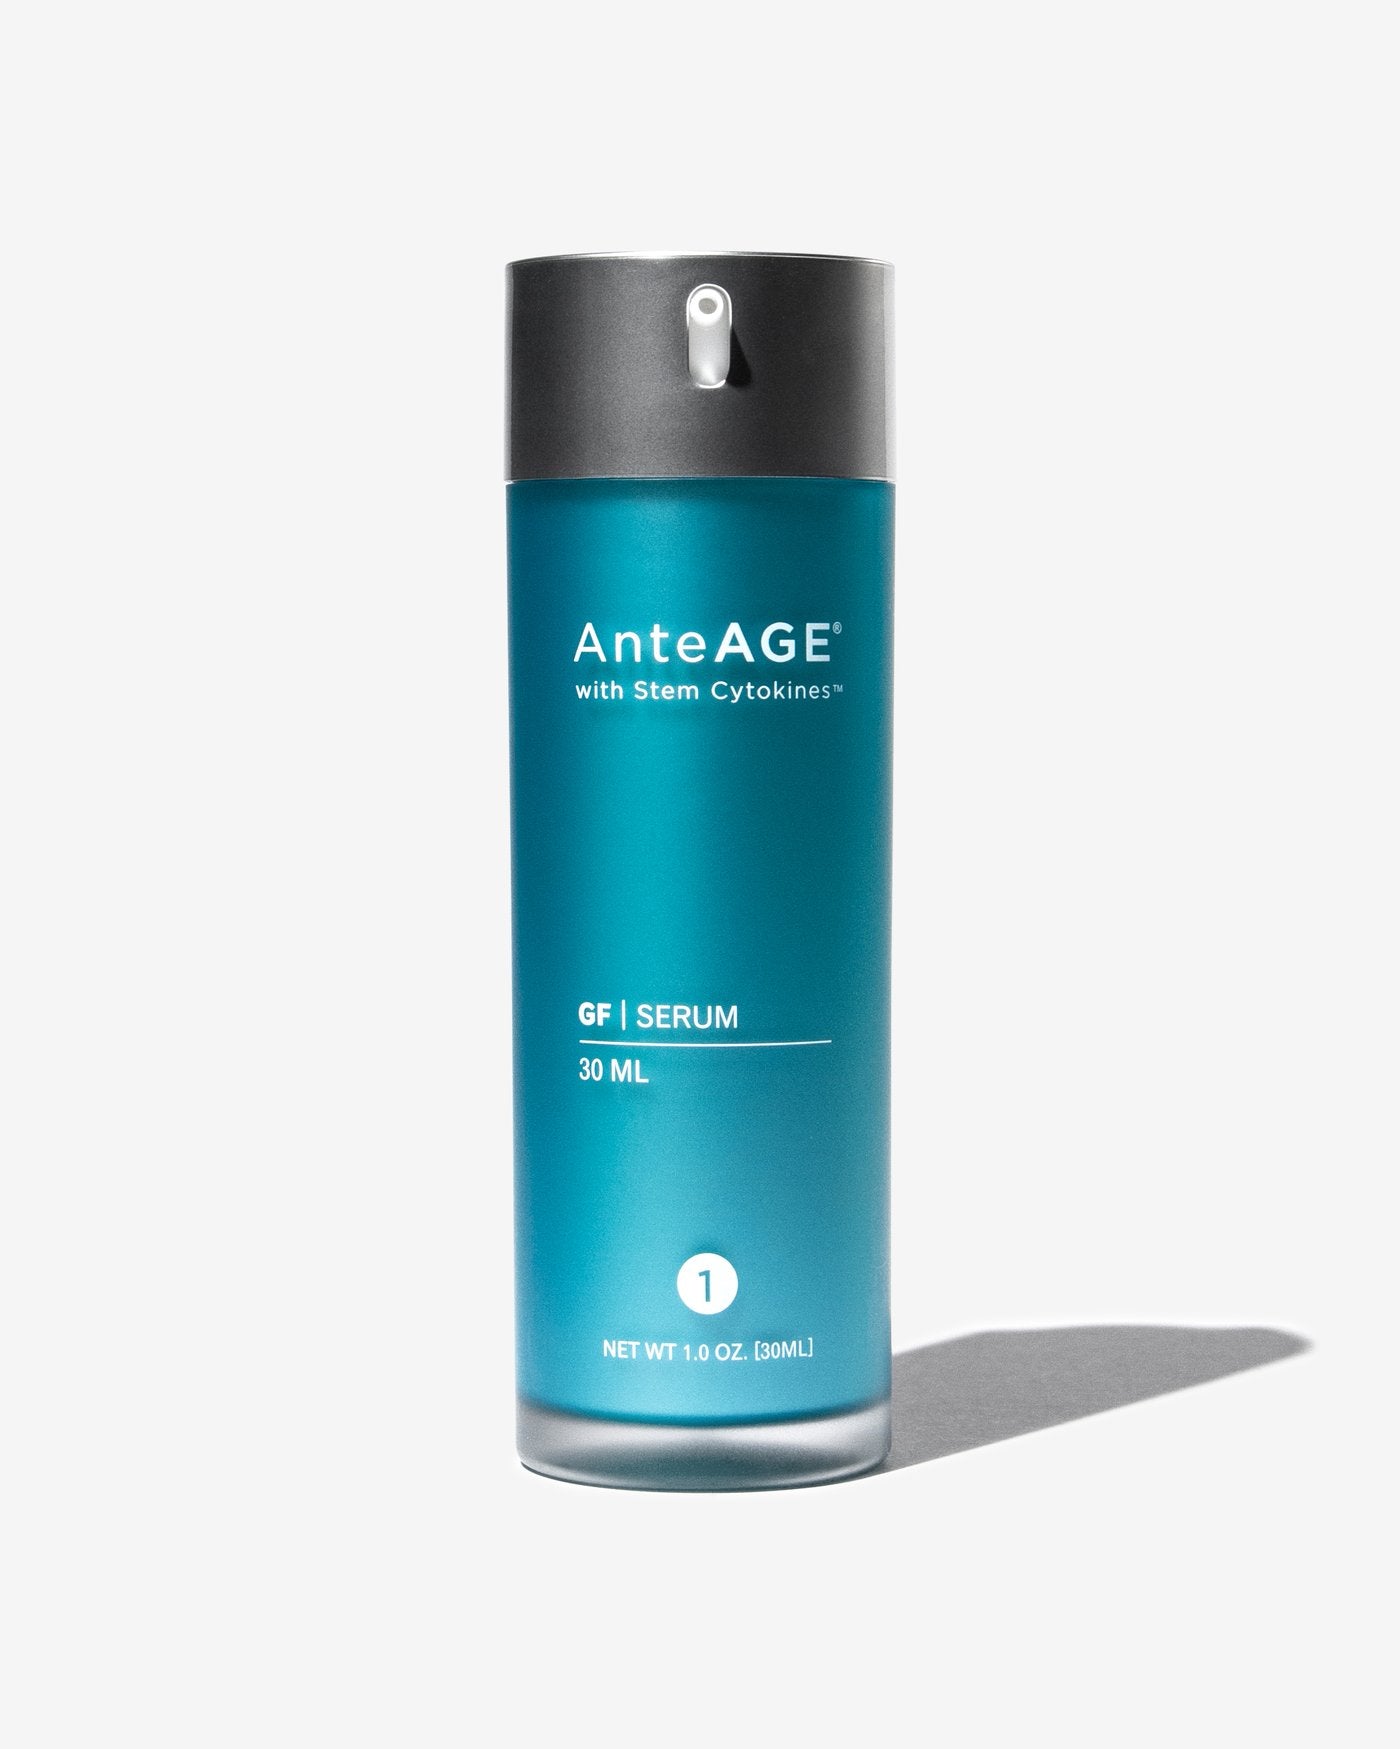 AnteAGE® Growth Factor Serum - Click to Buy!